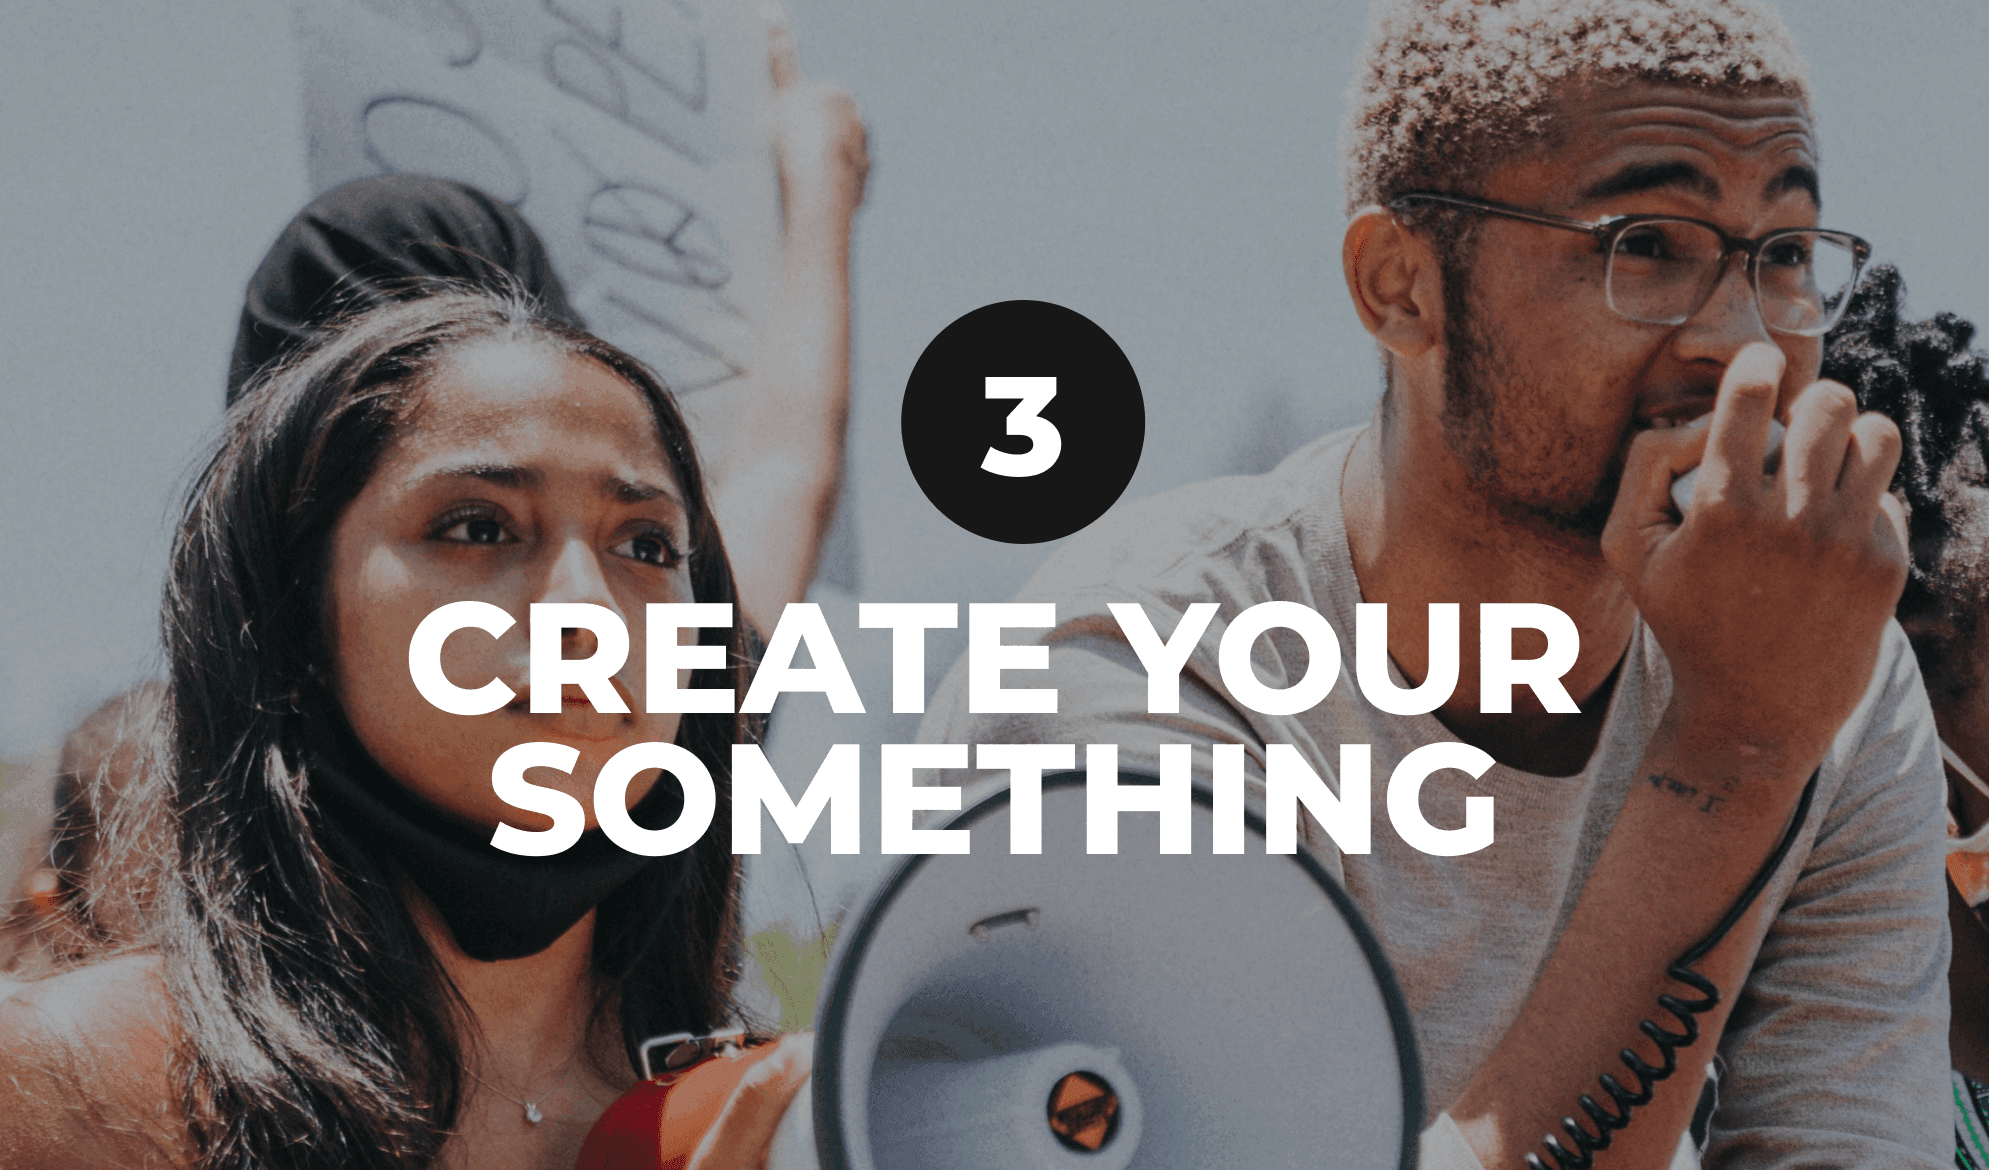 Title: "3. Create your something" (With image of two people at a protest speaking into a megaphone)